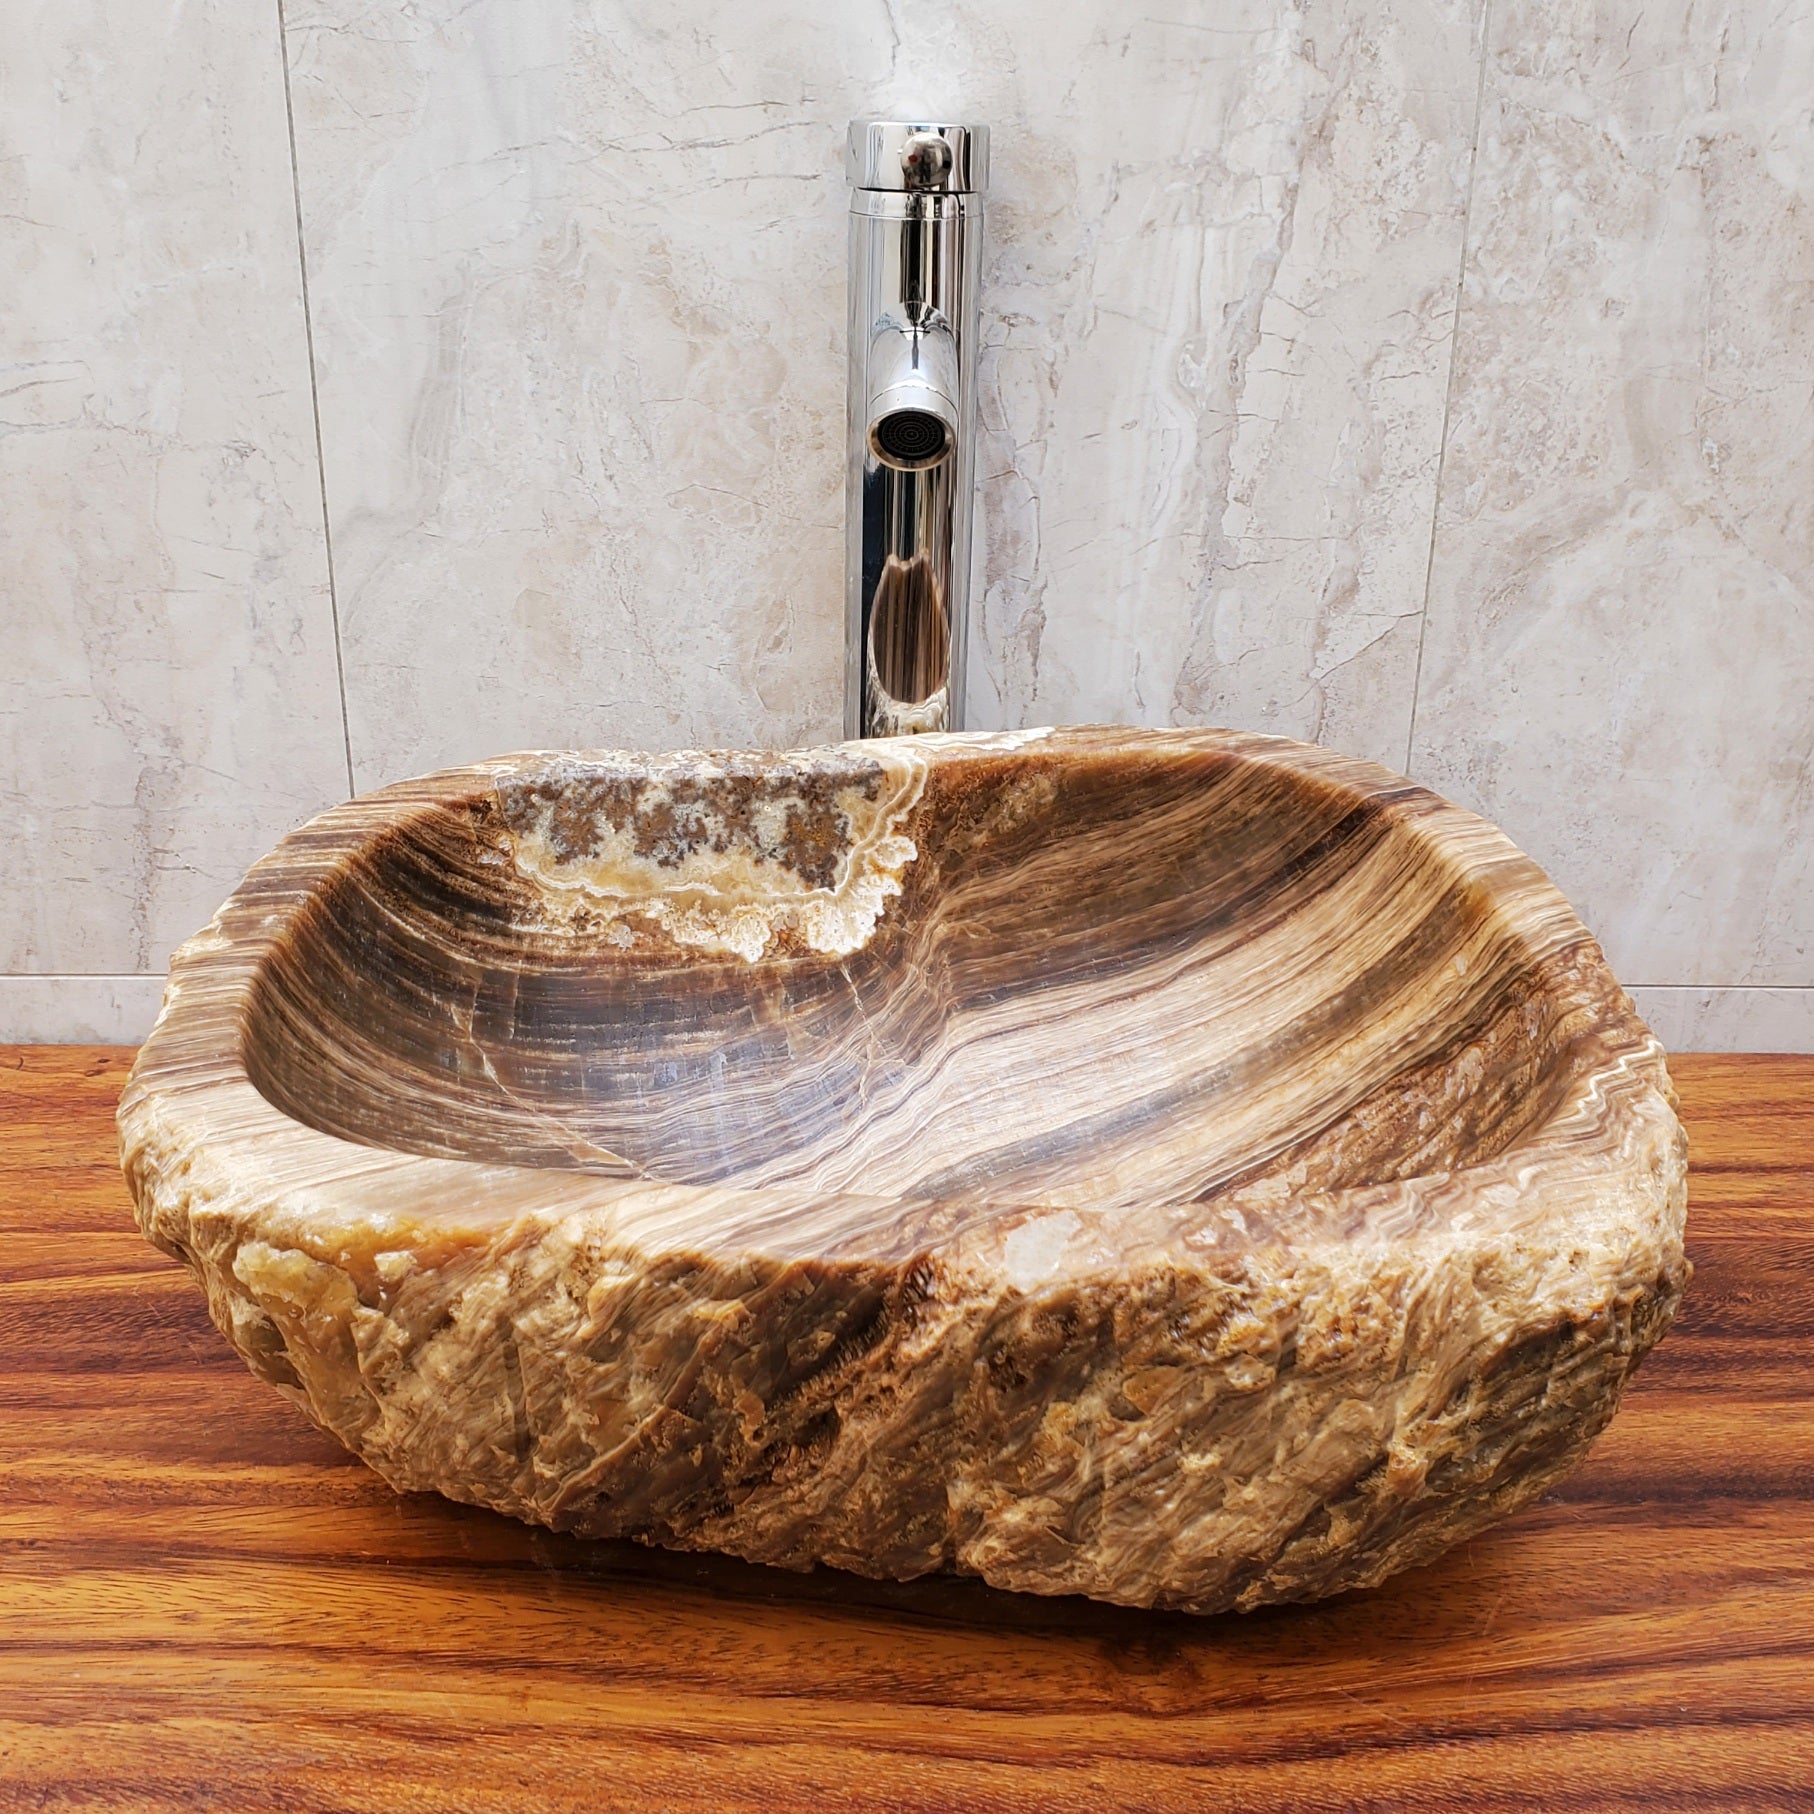 Chocolate and Tan Onyx Vessel Sink, Handmade in Mexico. Hand finished and ships from the USA. By now at www.felipenadgrace.com. 